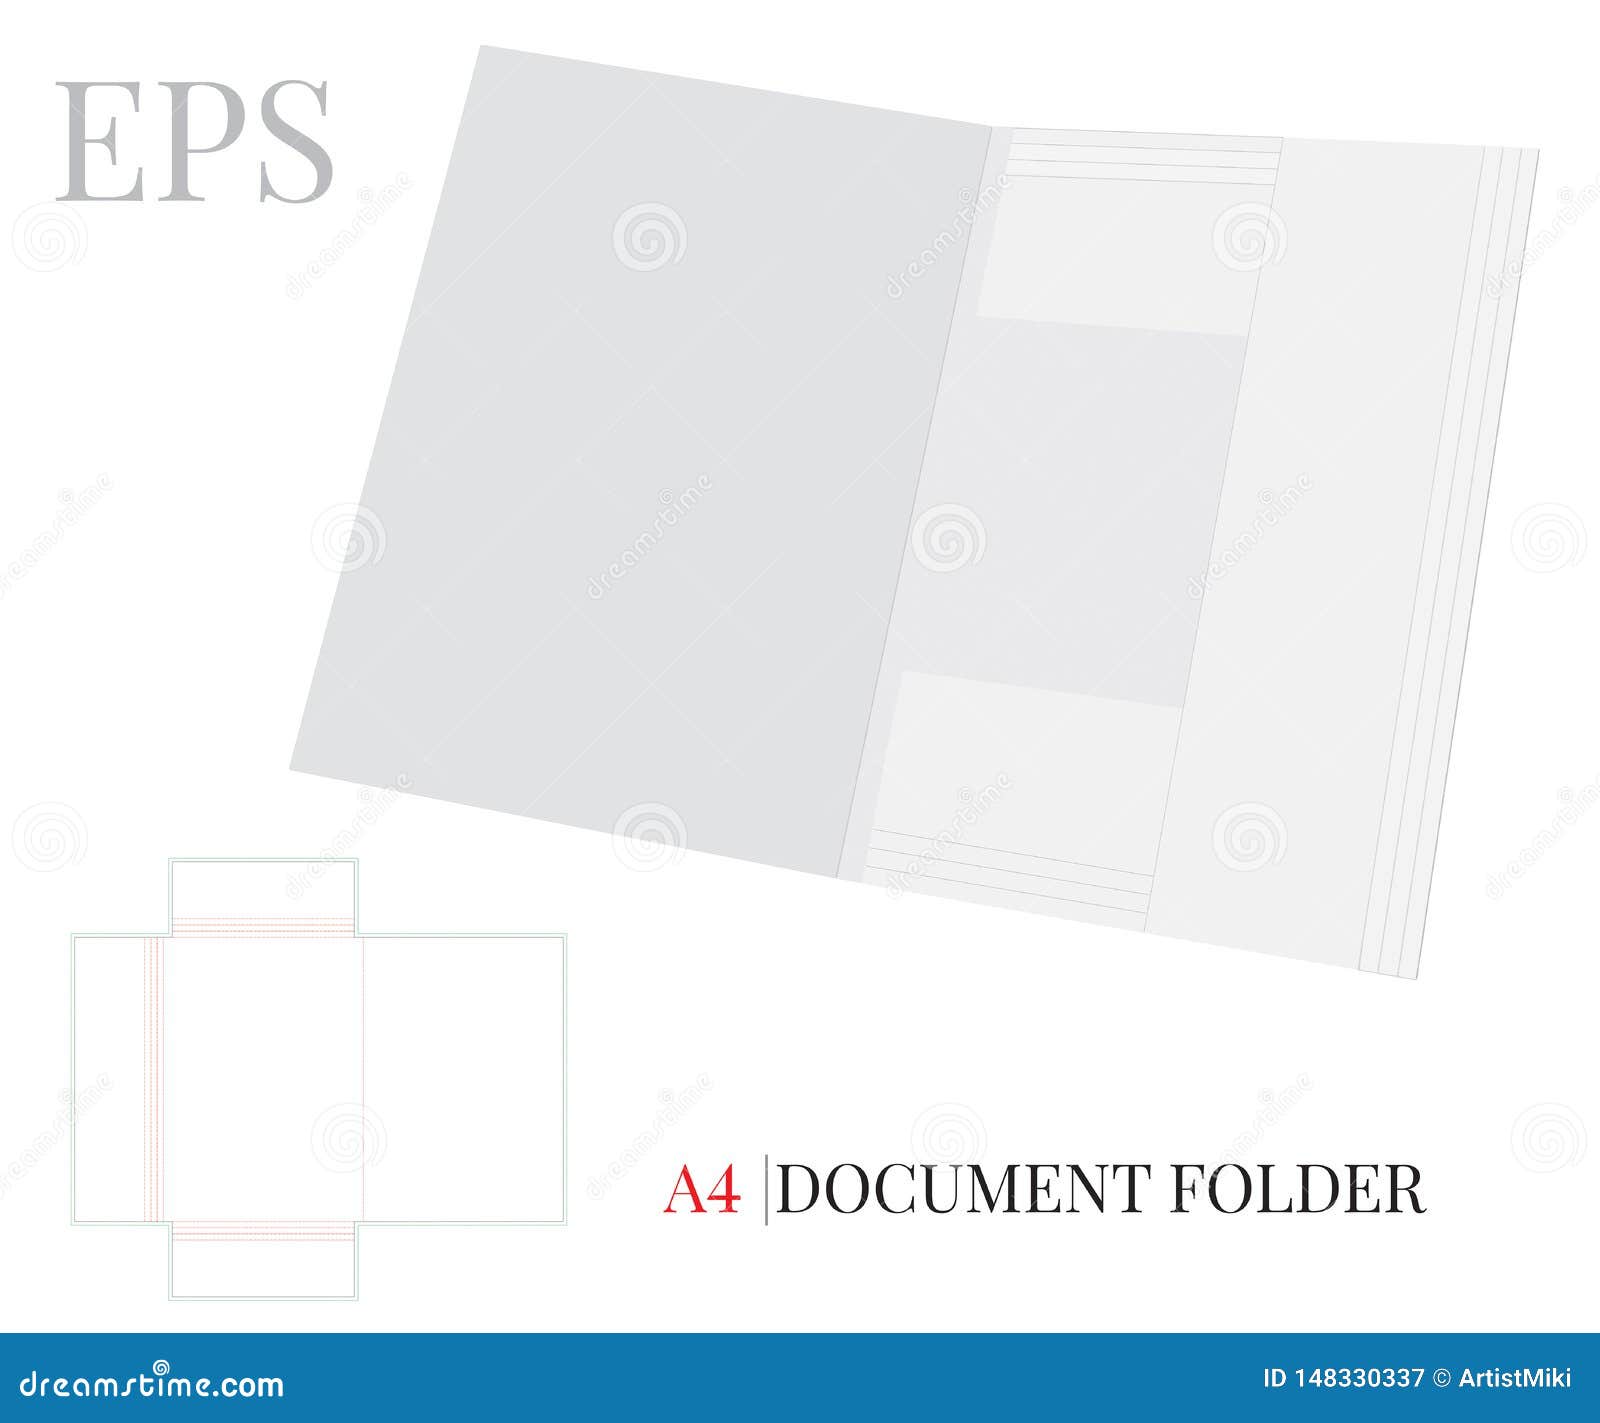 Document Folder Template A4. Vector With Die Cut / Laser Cut Lines